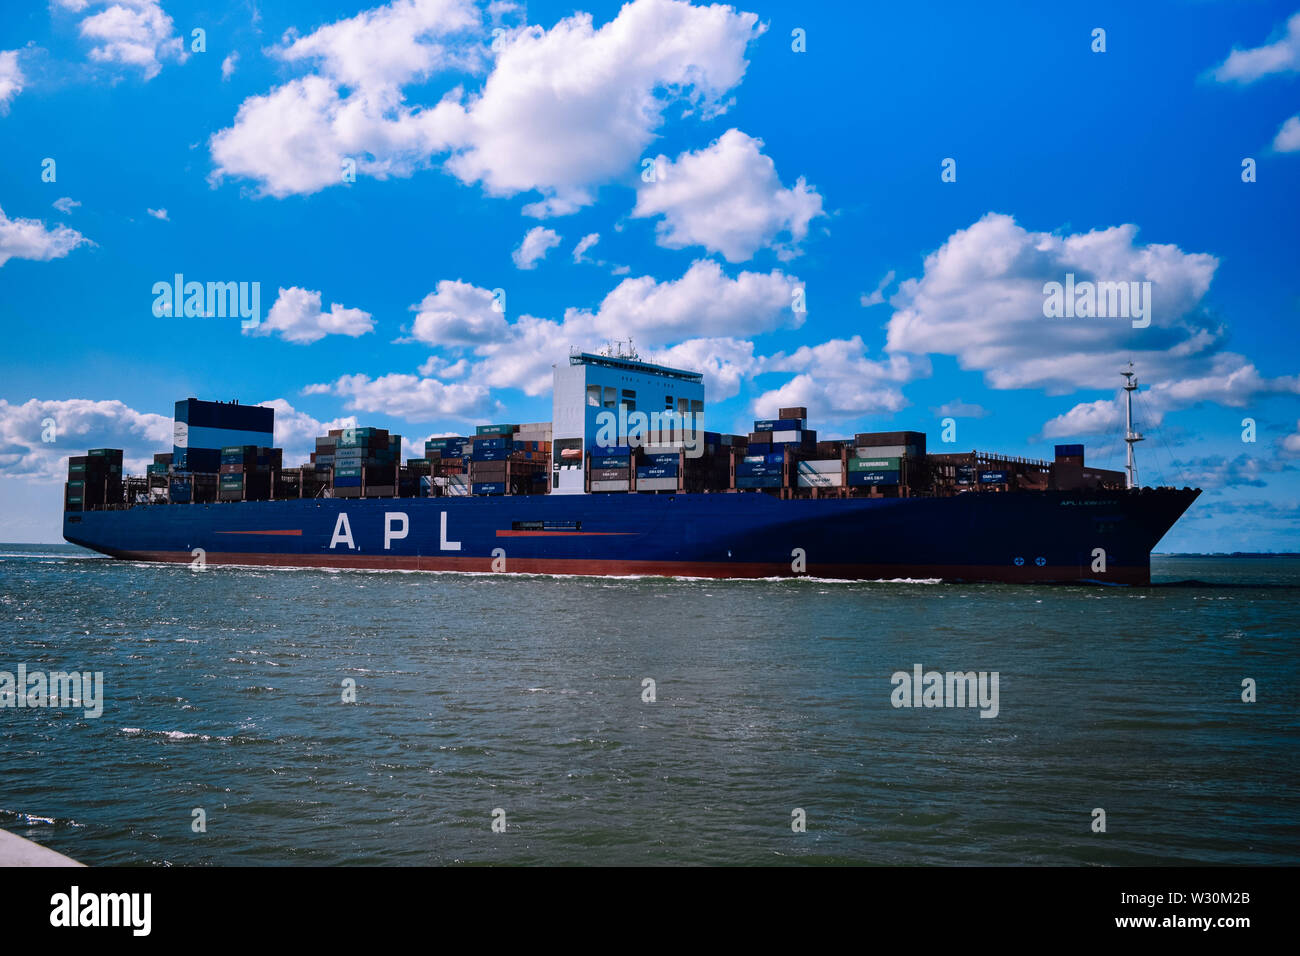 Containership in the Netherlands Stock Photo